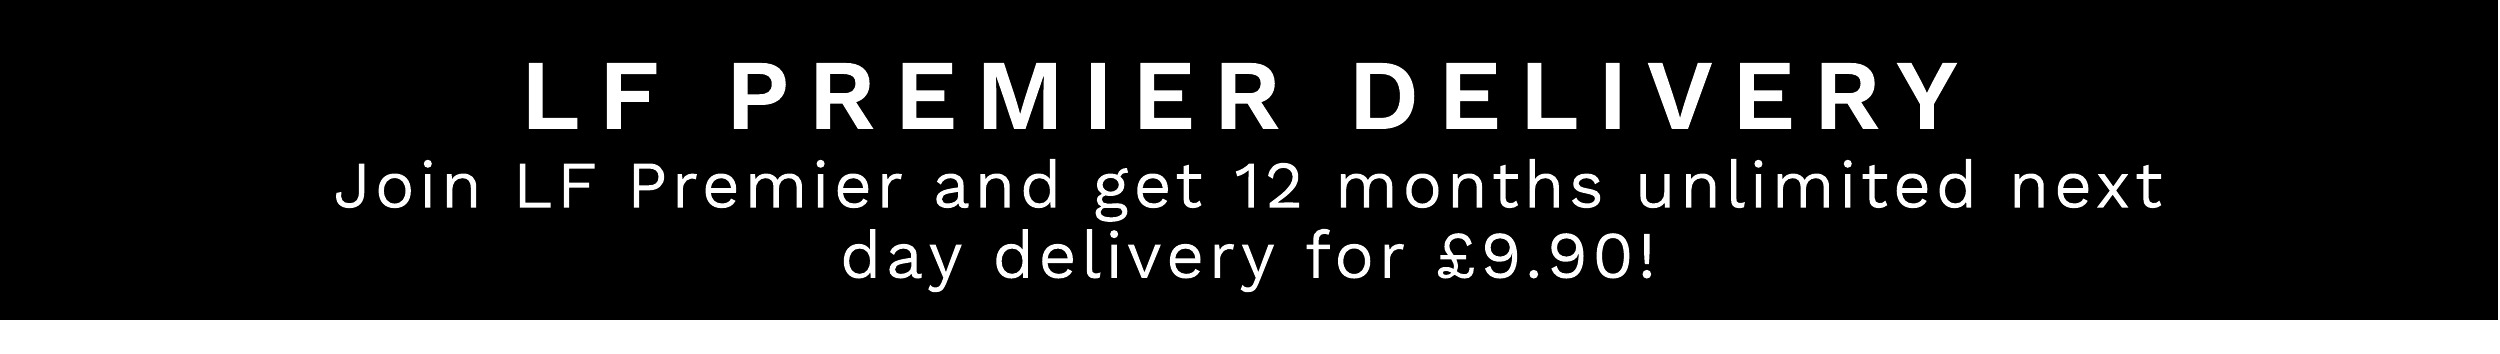 LF PREMIER DELIVERY Join LF Premier and get 12 months unlimited next day delivery for 9.90! 